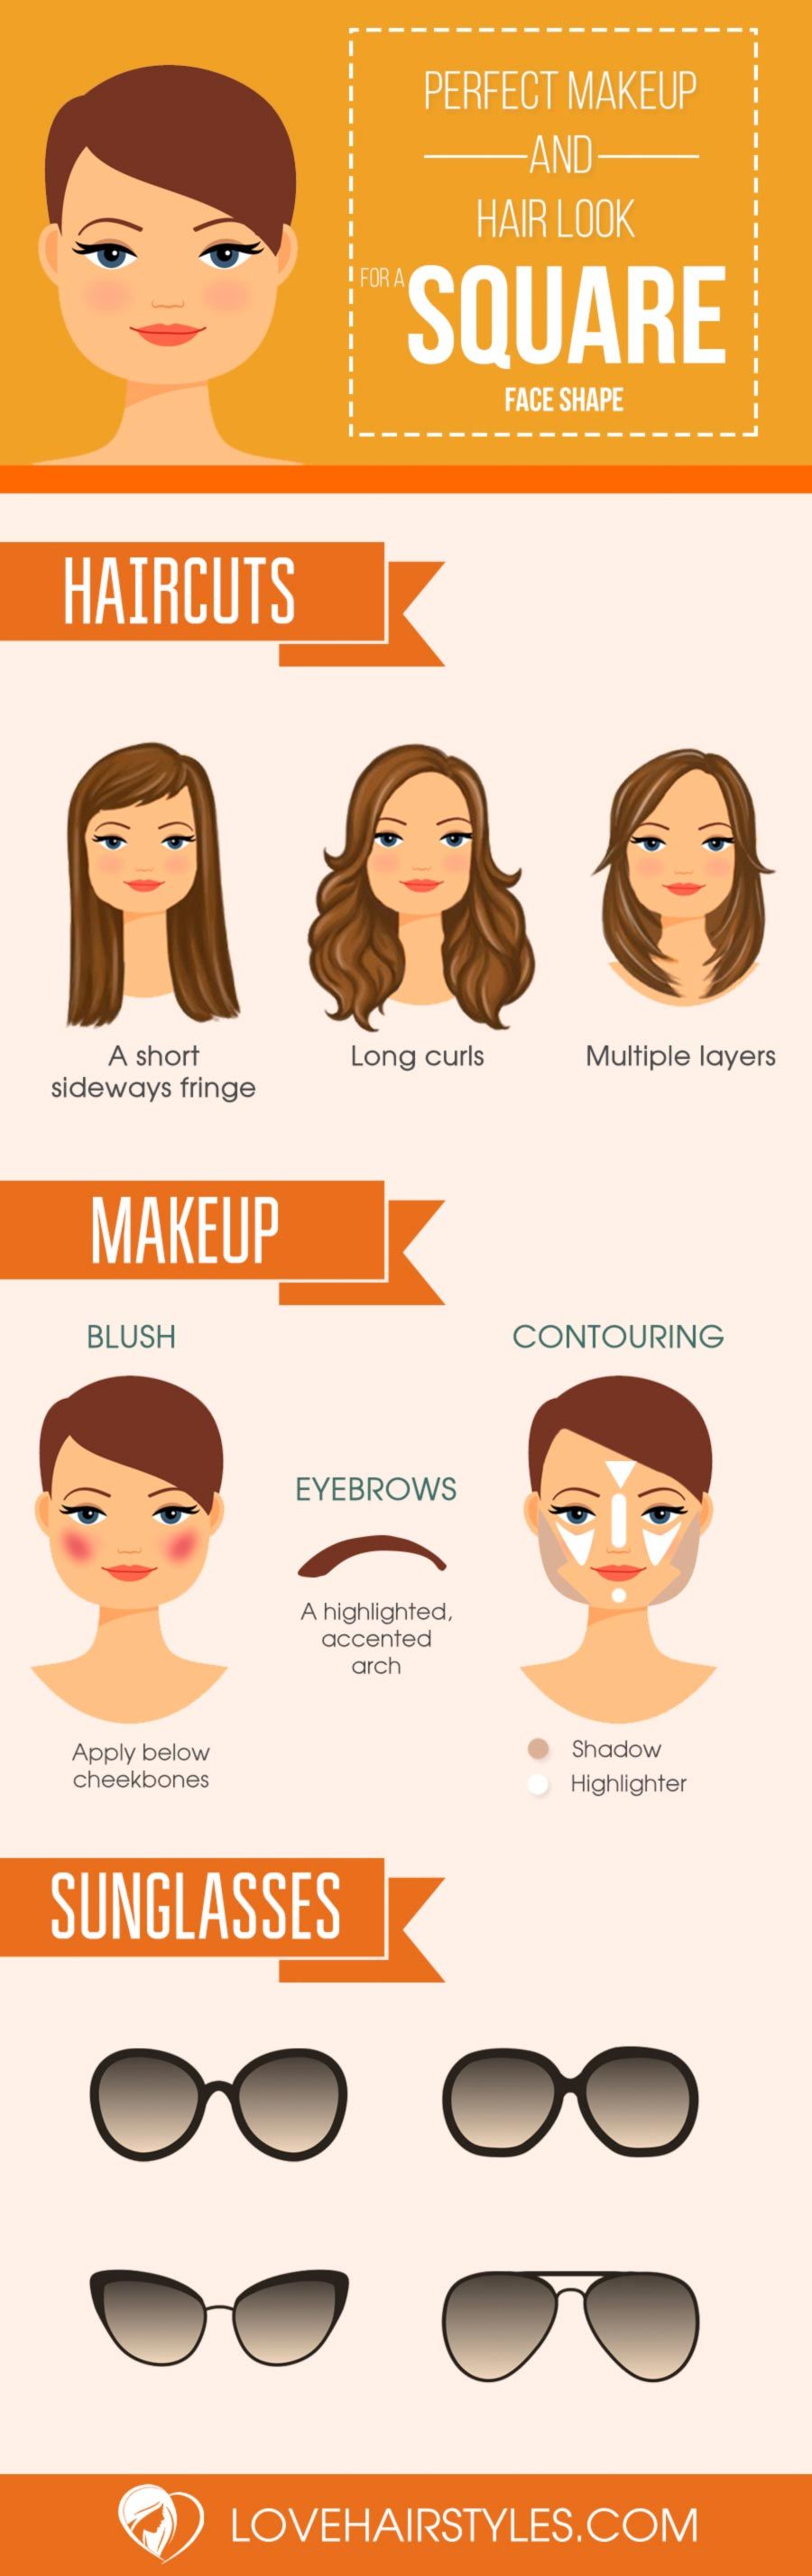 Style your hair according to the shape of your face! - Rediff.com